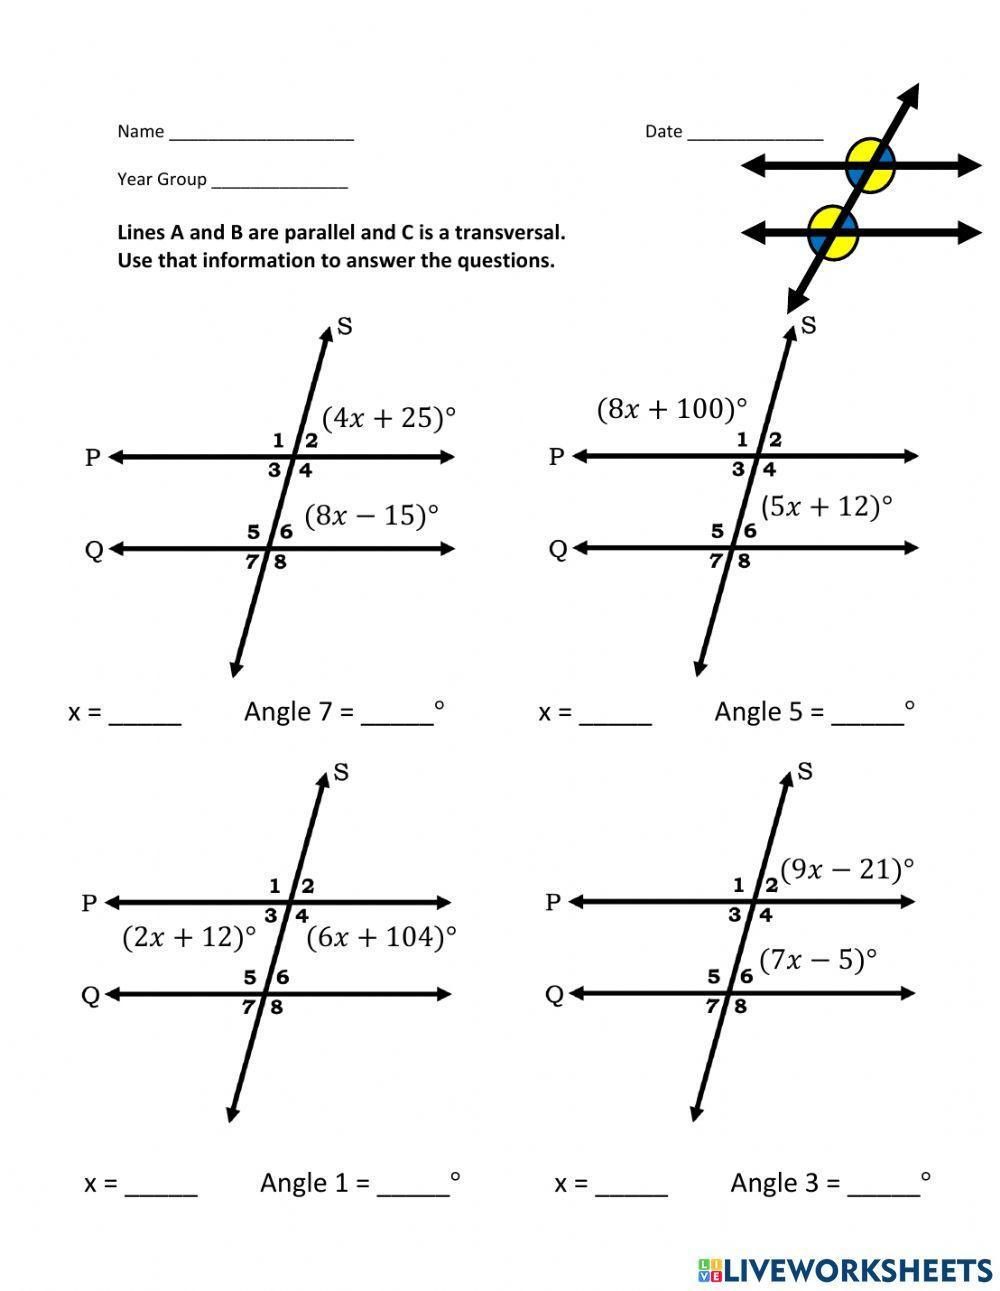 Parallel and Perpendicular Lines with a Trasnversal Line - Find the Angle